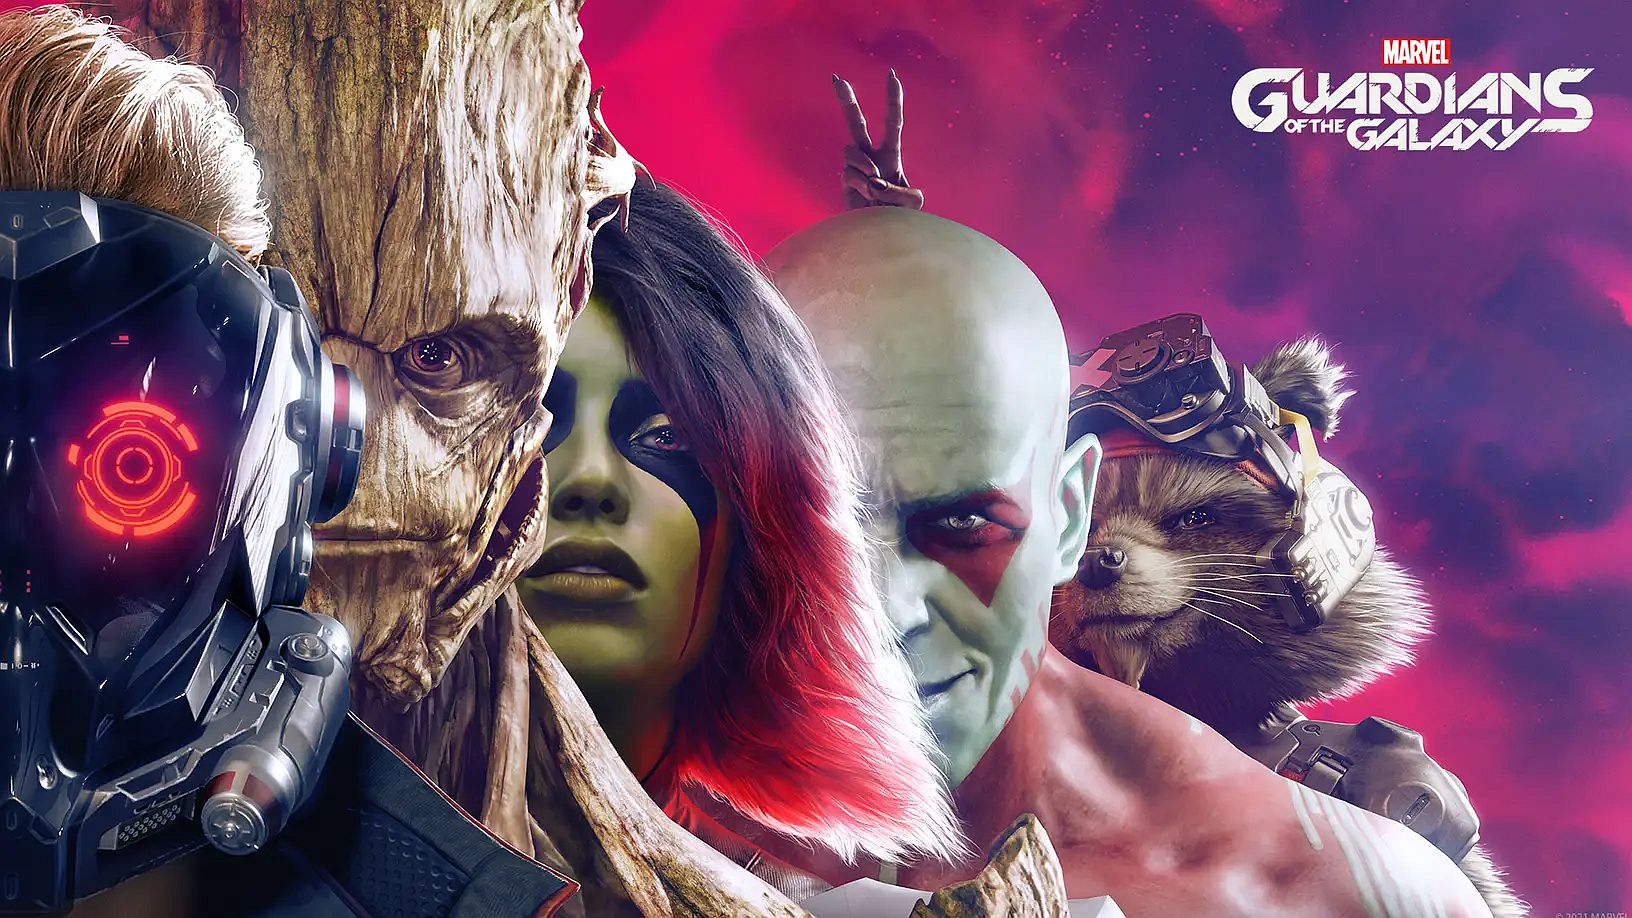 Guardians of the galaxy poster featuring the faces of Star-Lord, Groot, Gamora, Drax & Rocket holding bunny ears behind the head of Drax